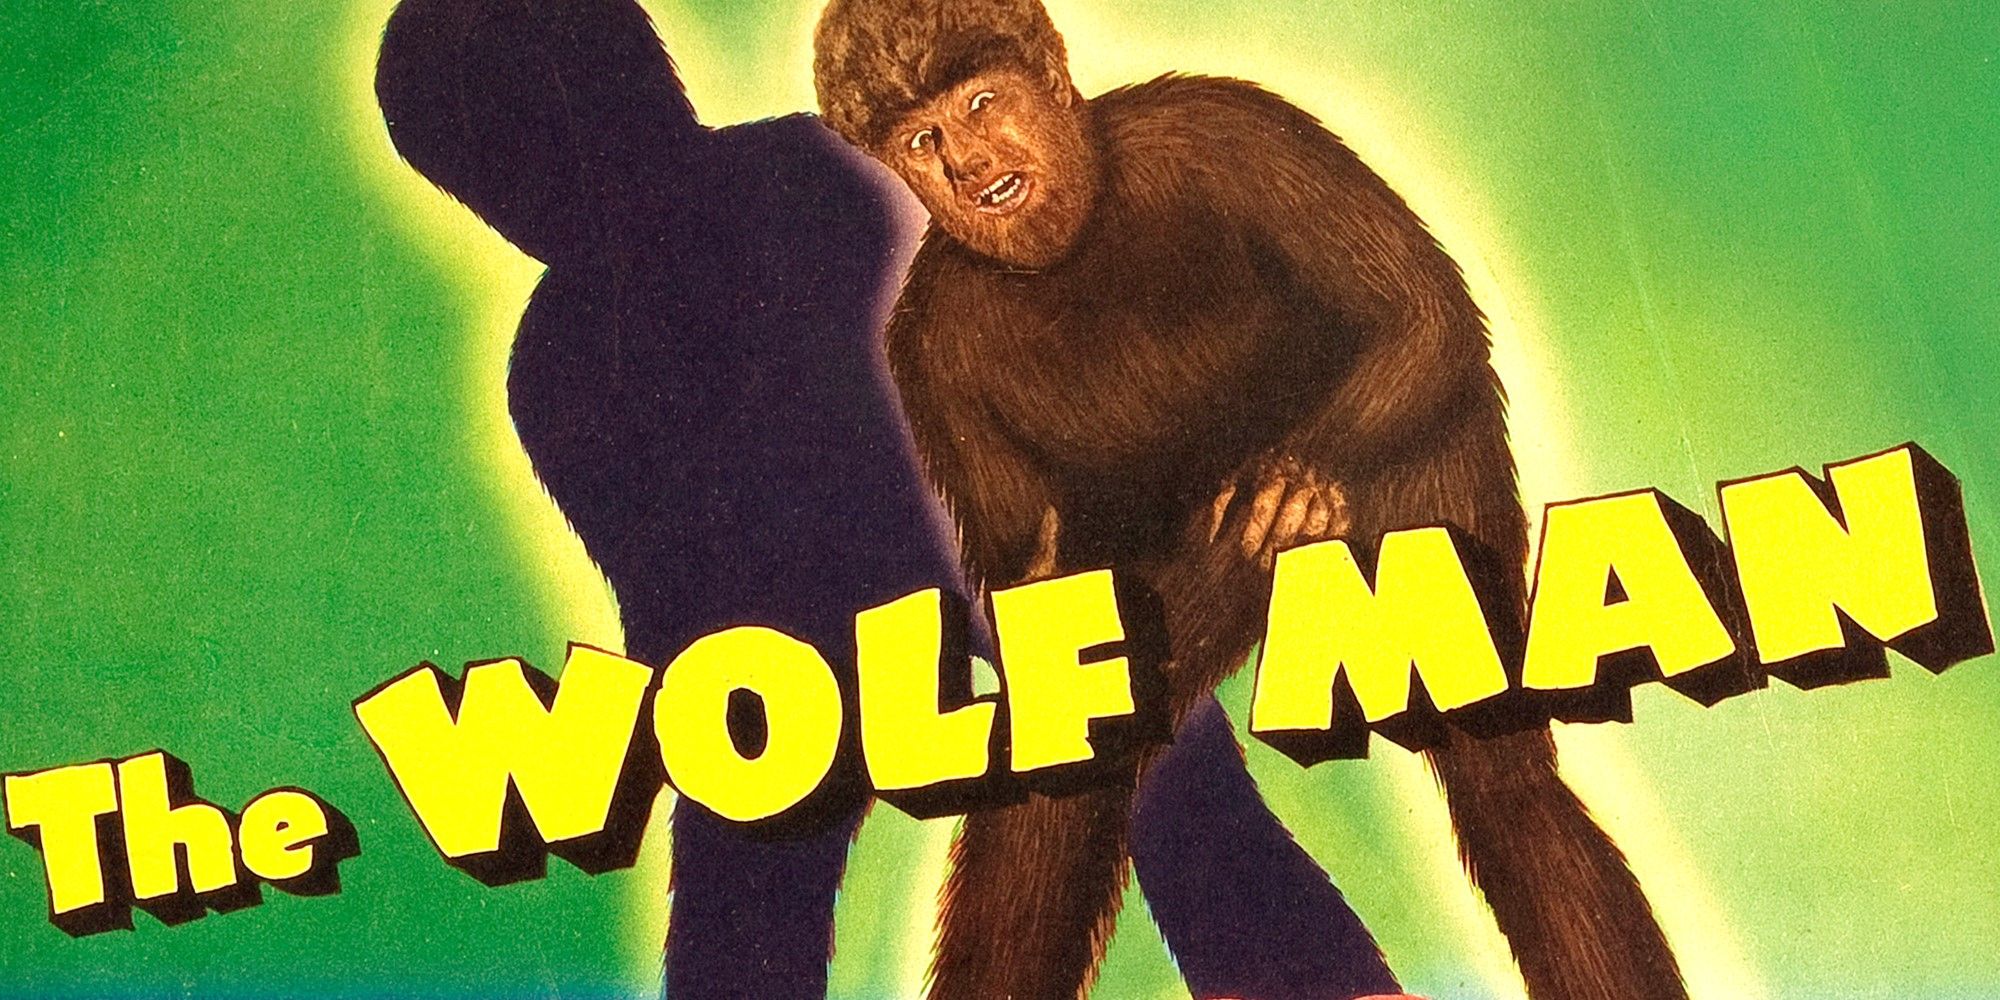 The Wolf Man (1941) official lobby card, showing the monster and the film's title